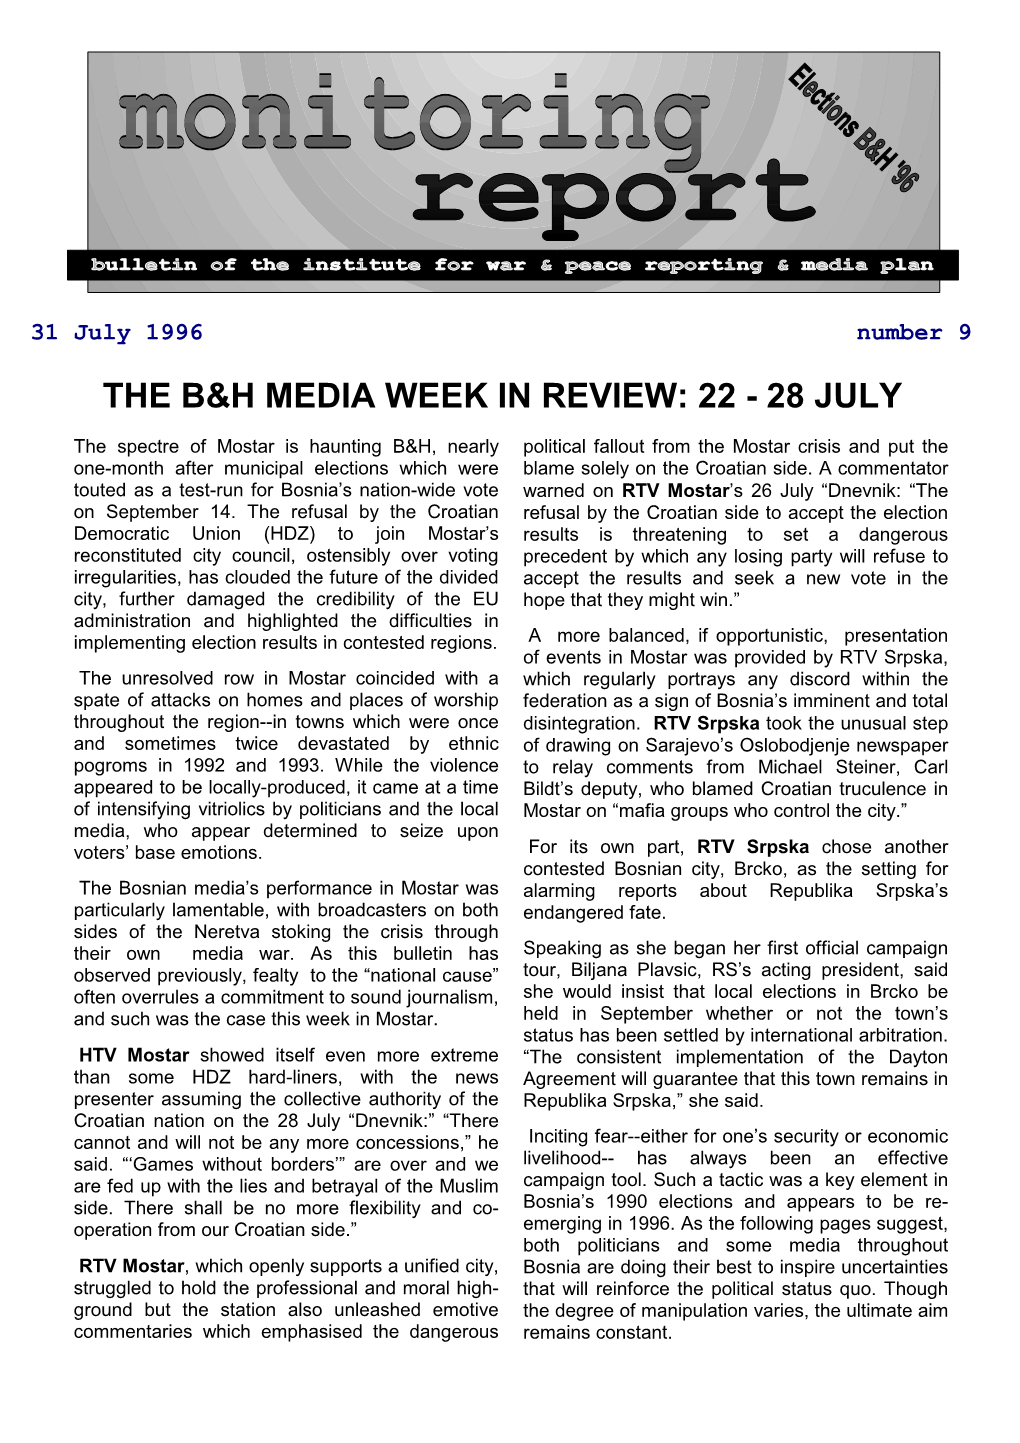 The B&H Media Week in Review: 22